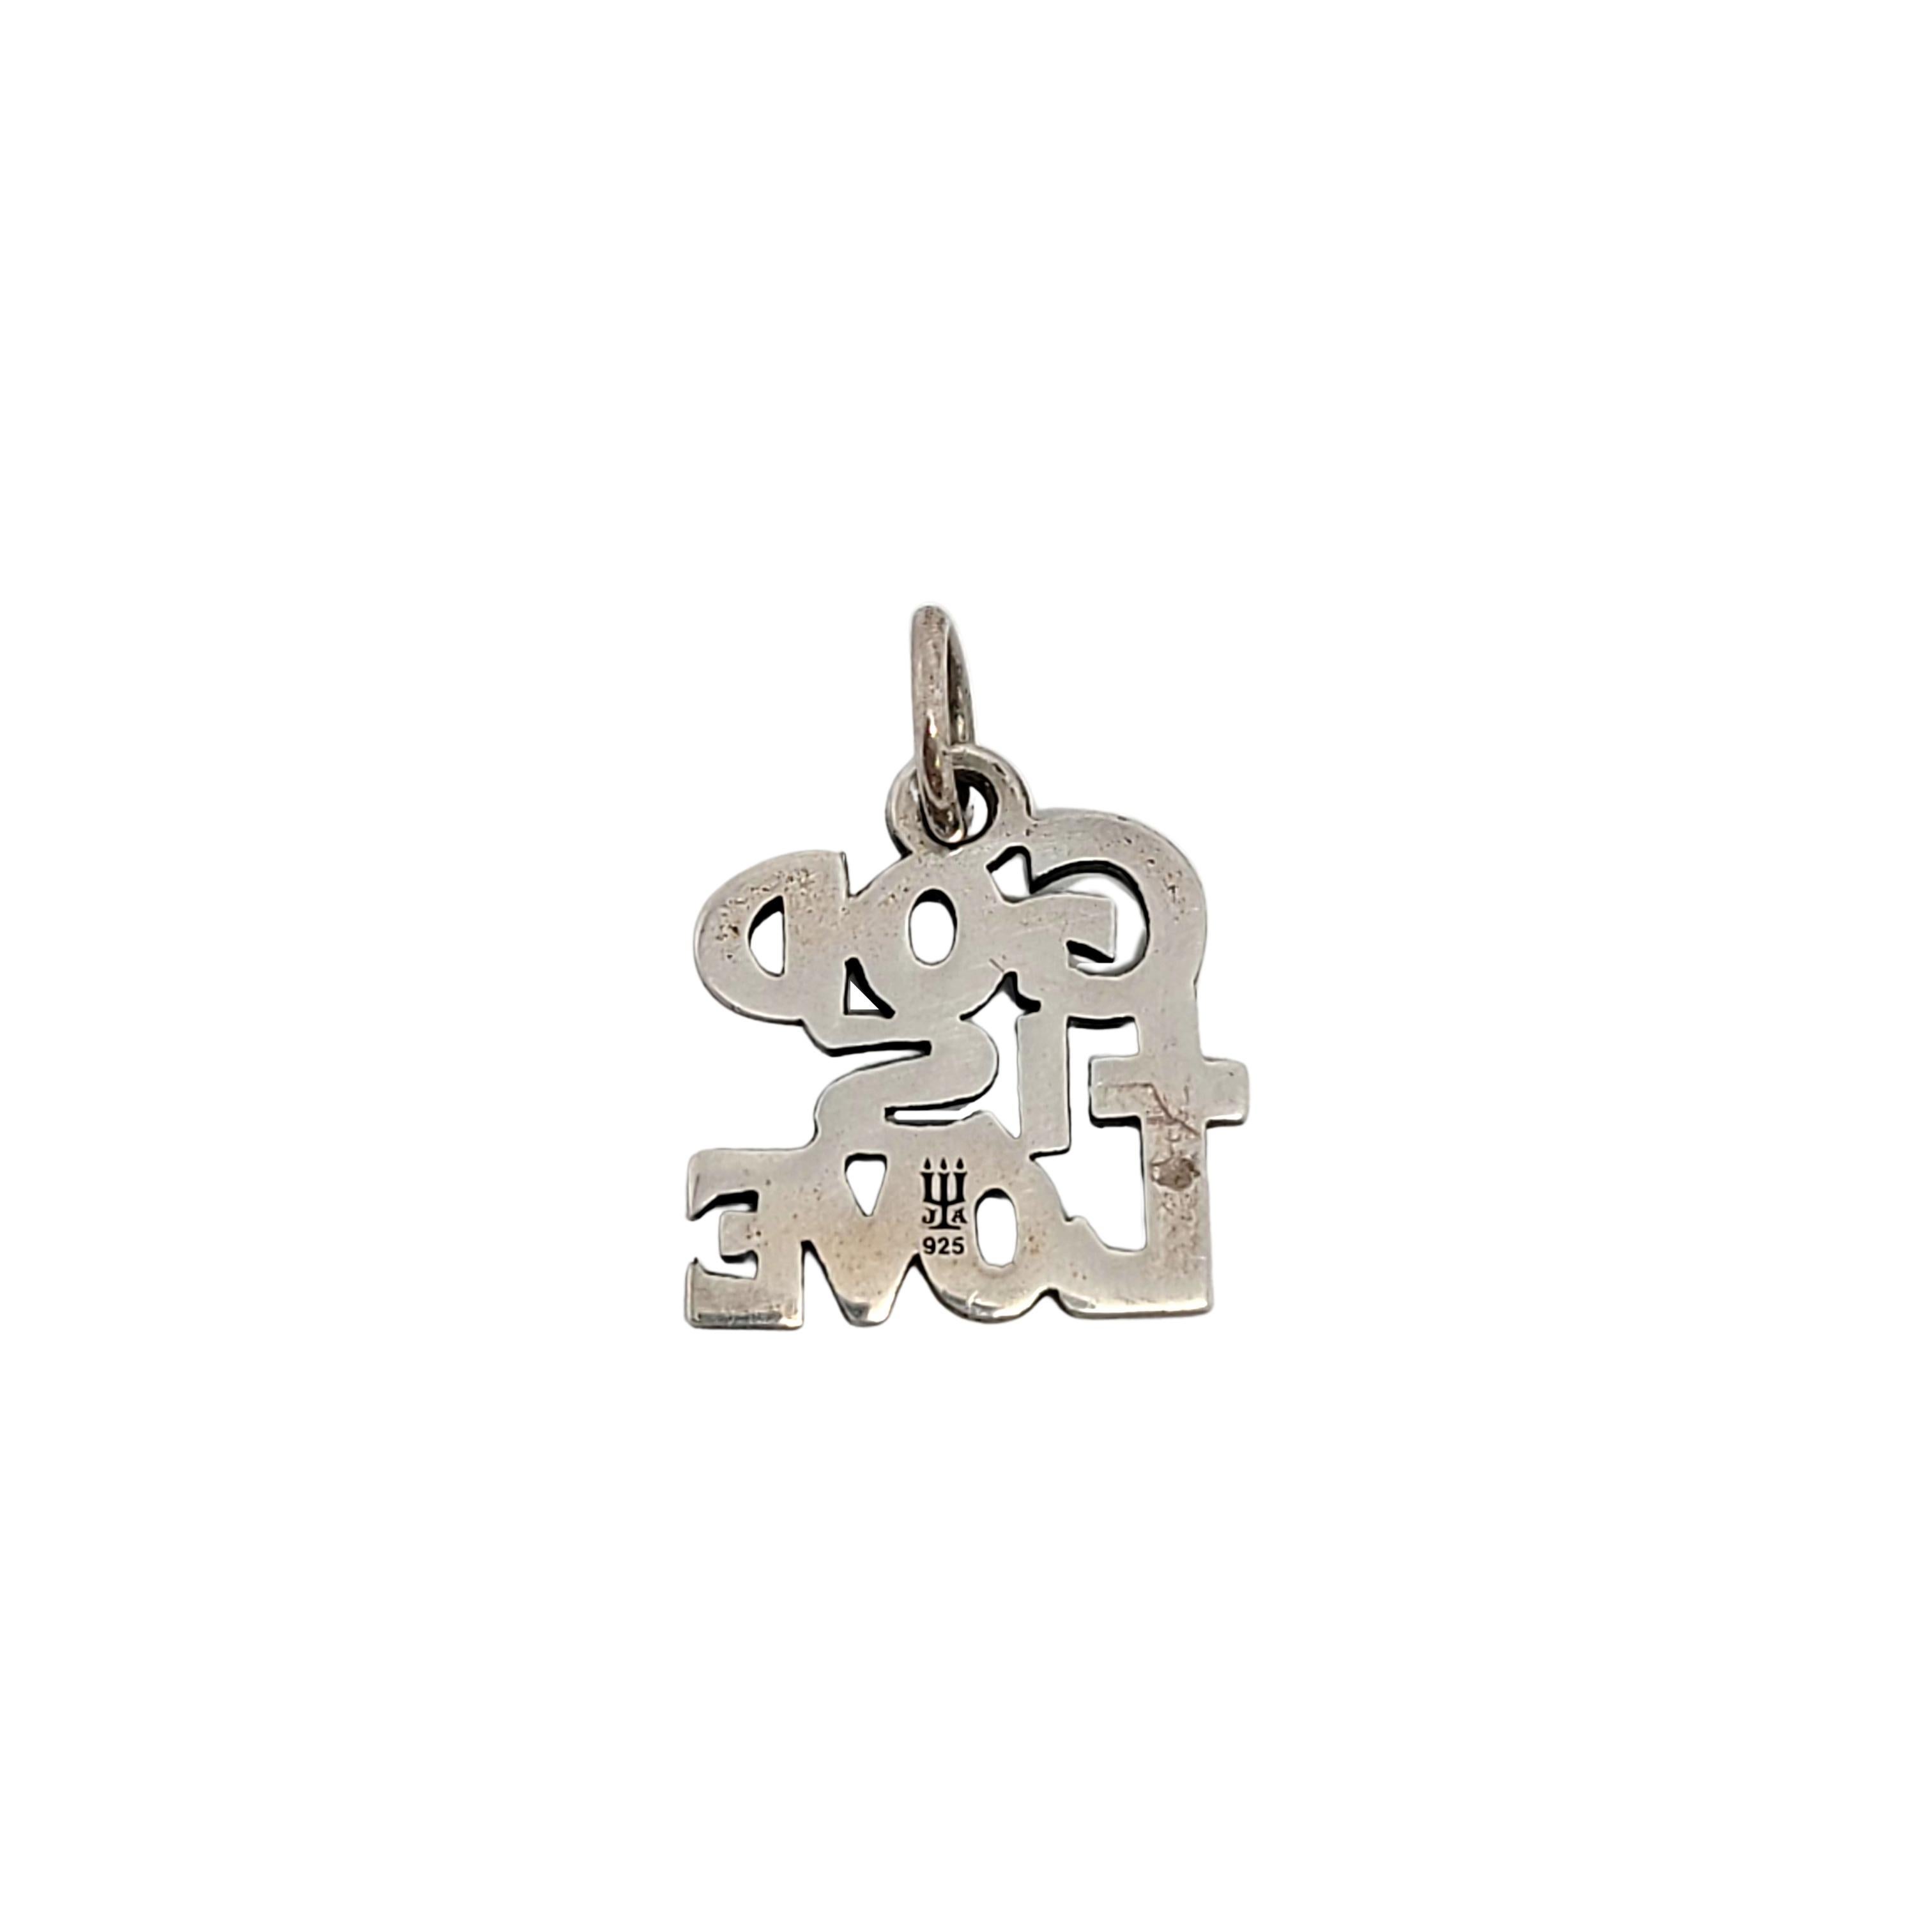 James Avery sterling silver God Is Love charm/pendant.

Beautiful openwork charm that says :God is Love